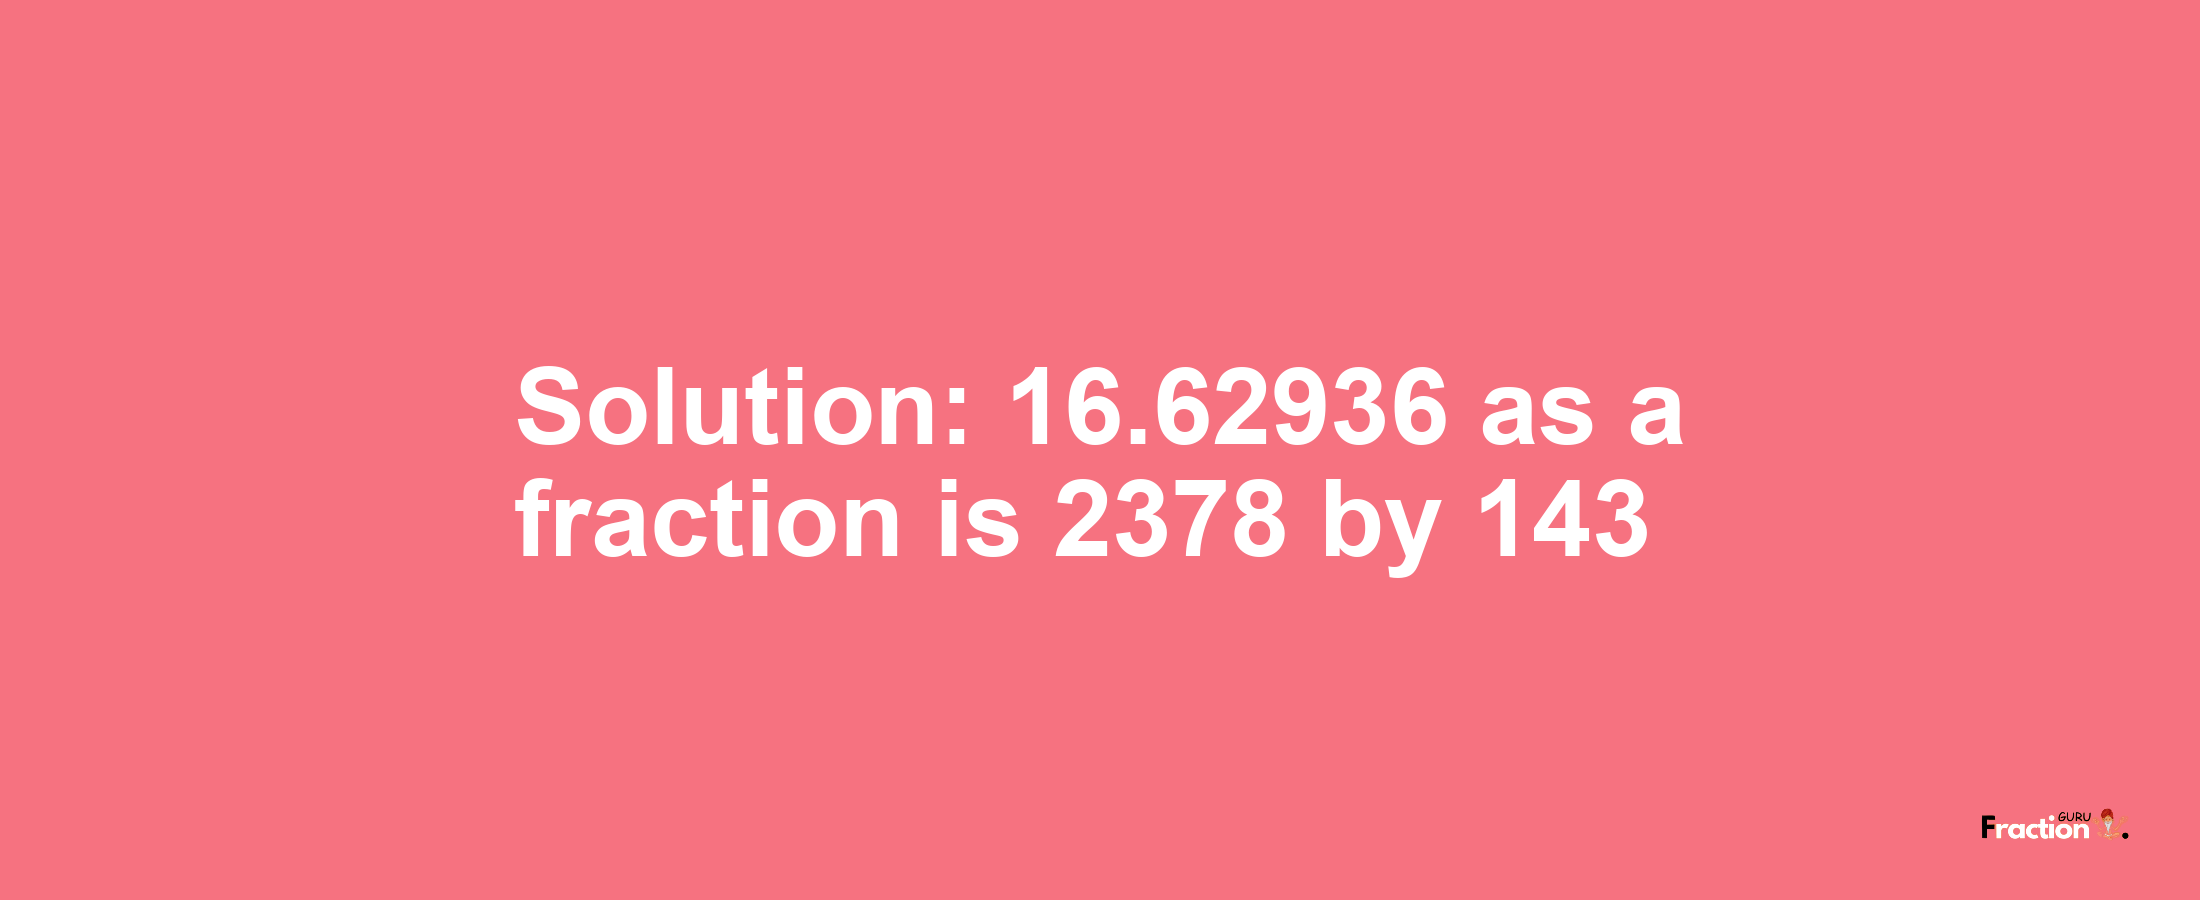 Solution:16.62936 as a fraction is 2378/143